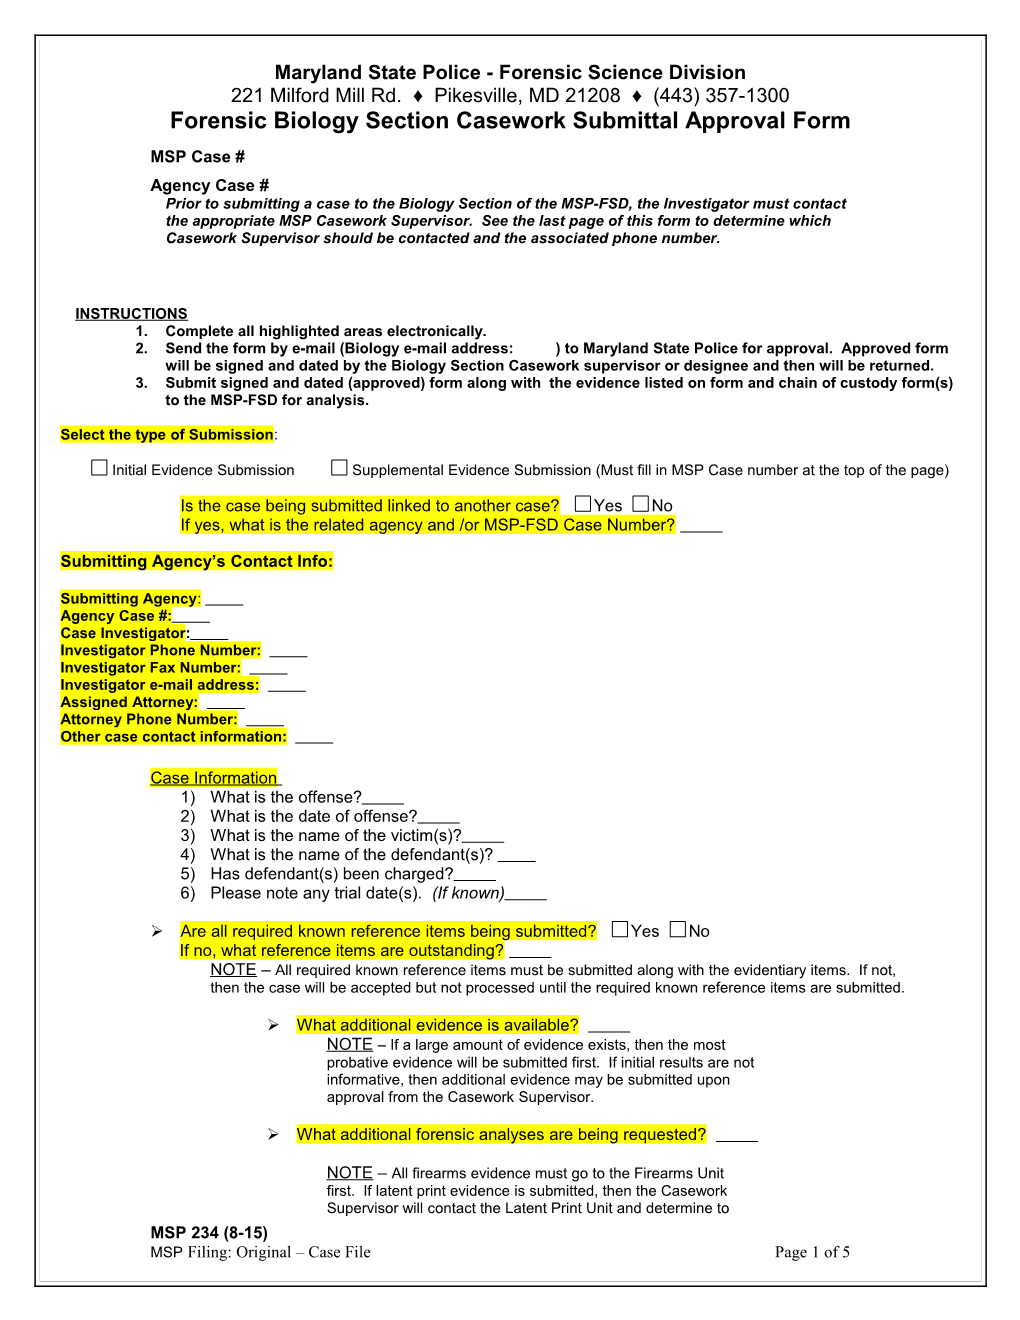 Forensic Biology Section Casework Submittal Approval Form